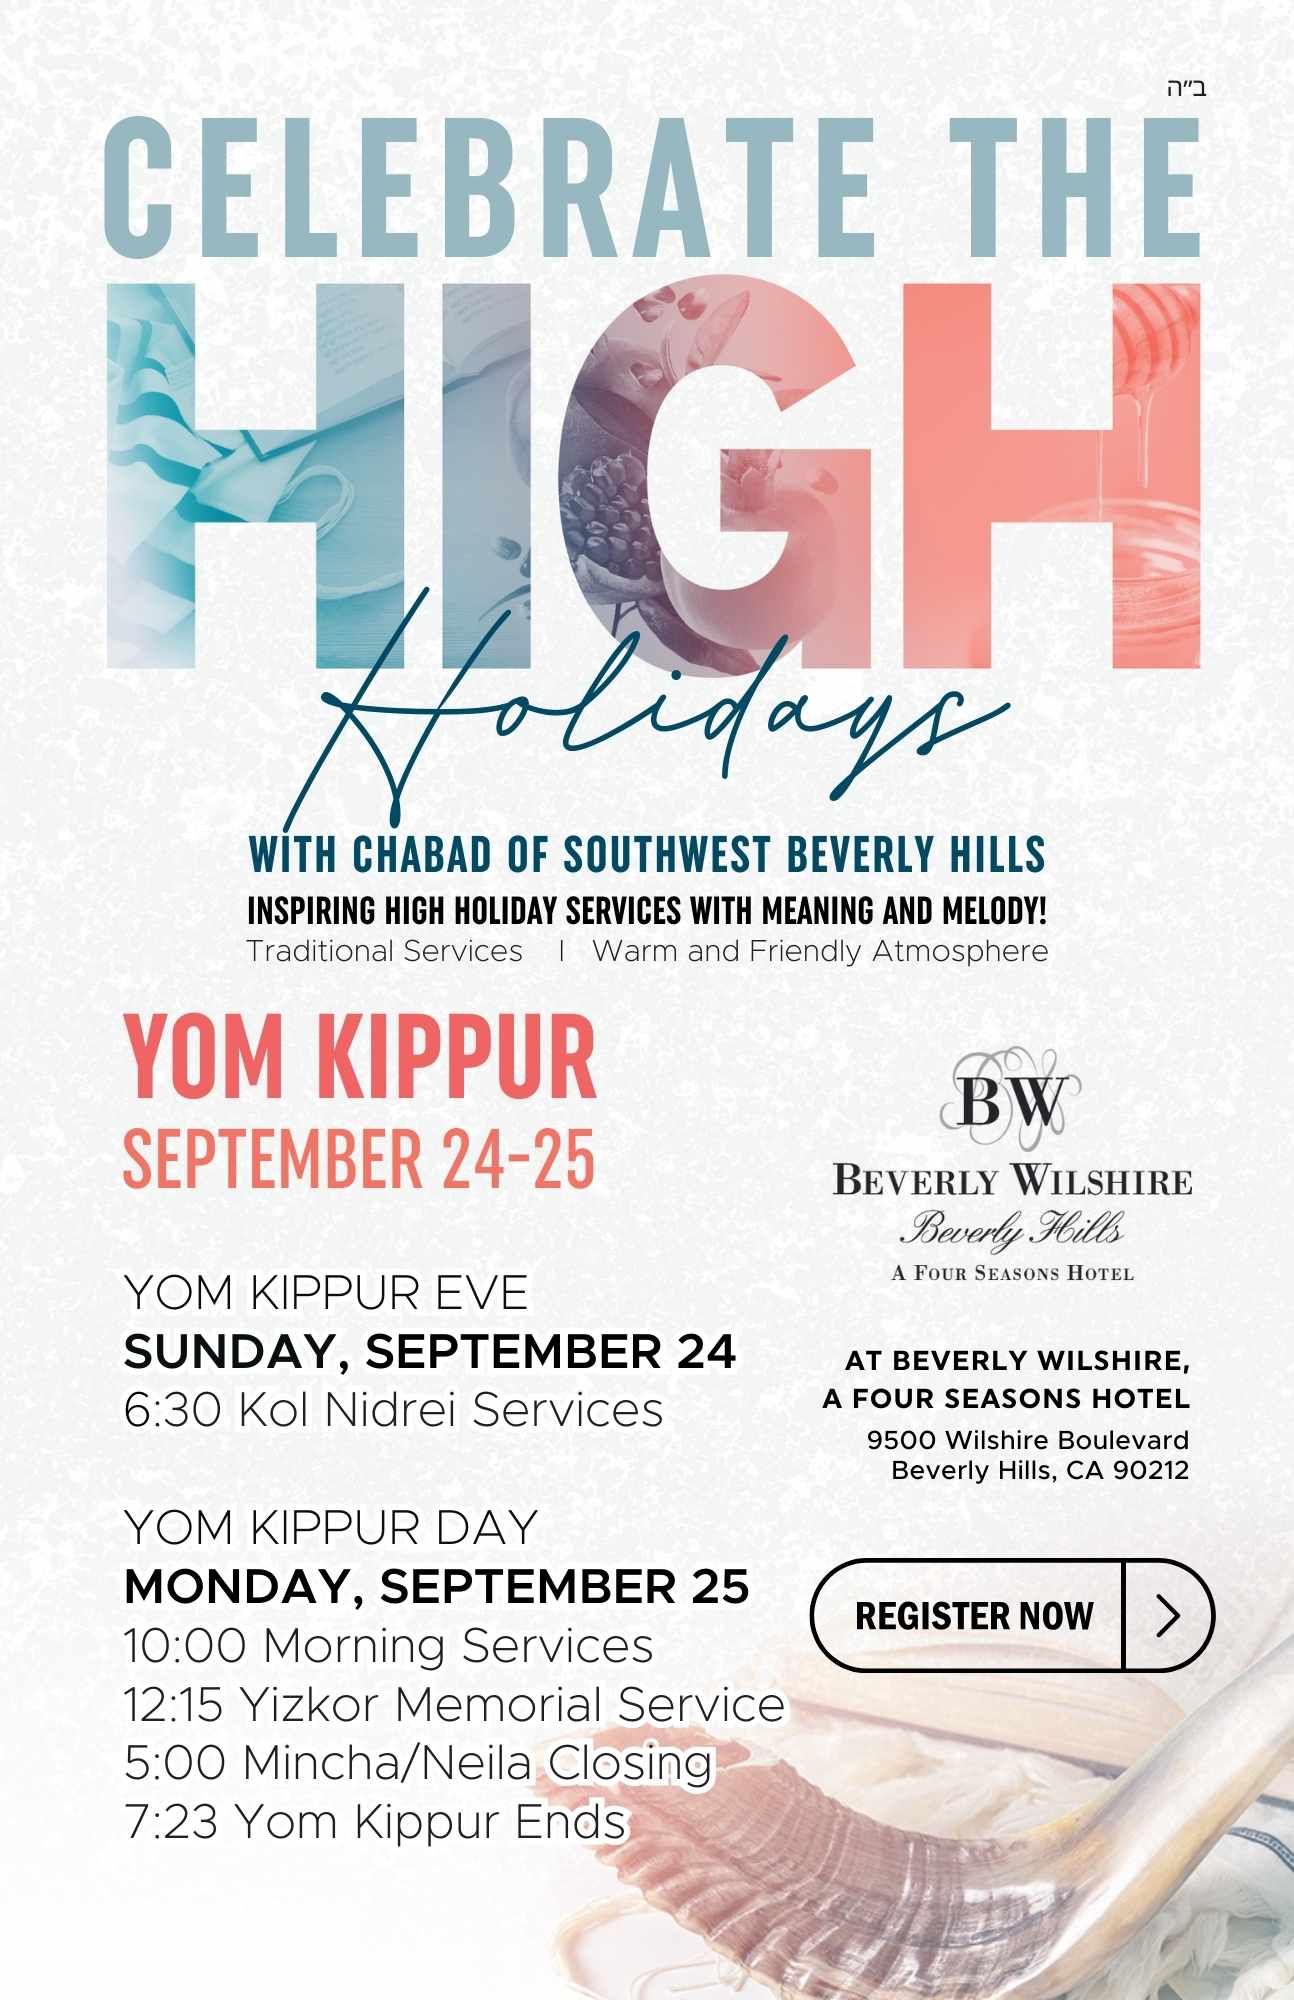 CHABAD YOM KIPPUR AT BEVERLY WILSHIRE, A FOUR SEASONS HOTEL WITH CHABAD OF SOUTHWEST BEVERLY HILLS